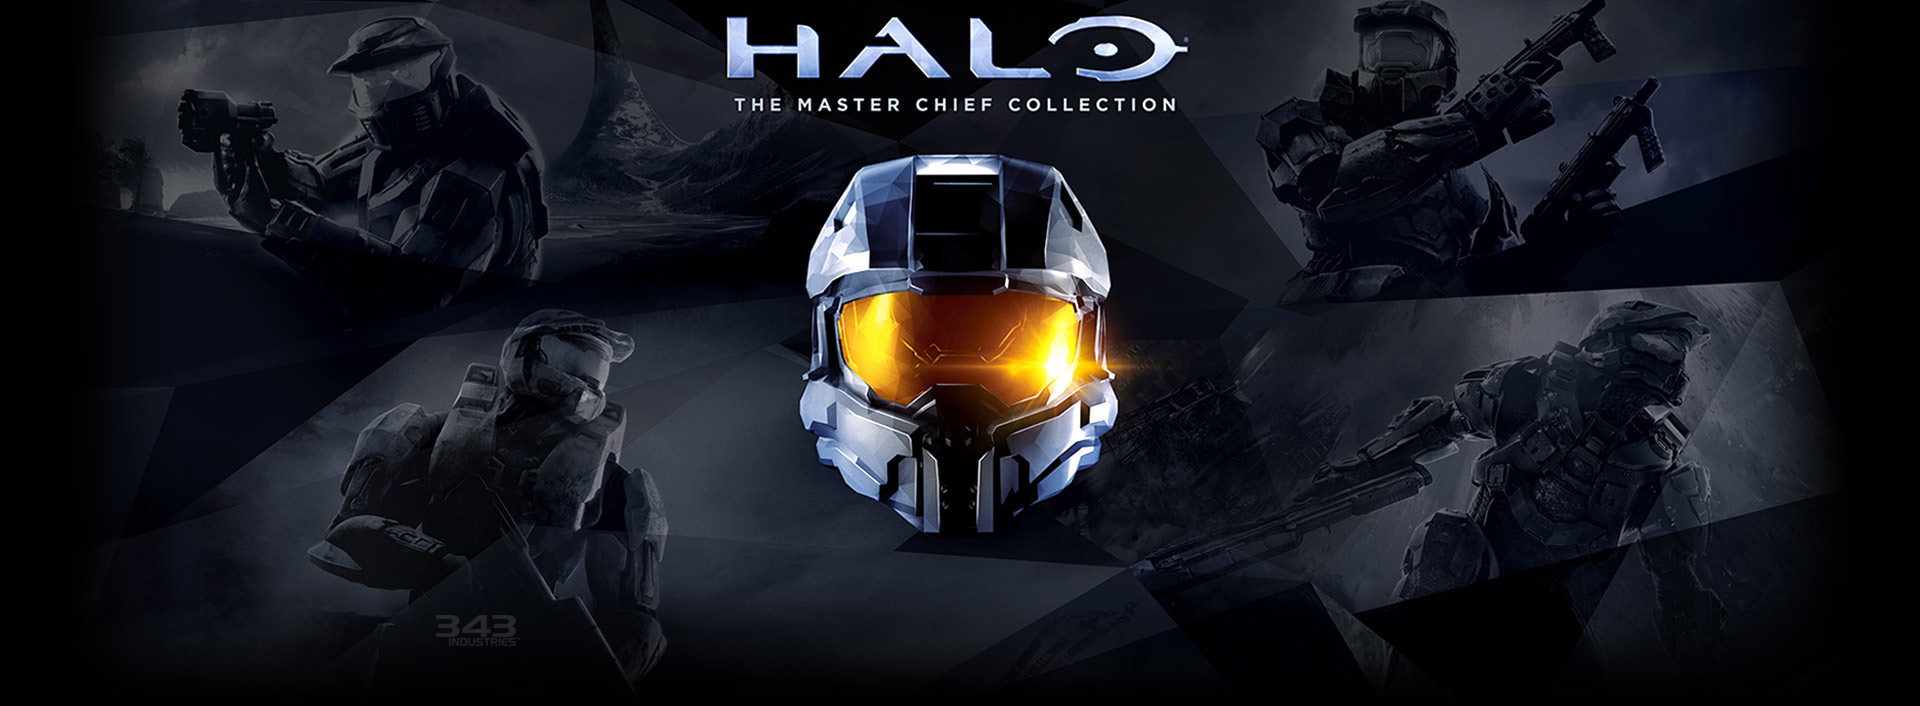 Why Halo The Master Chief Collection Is Important